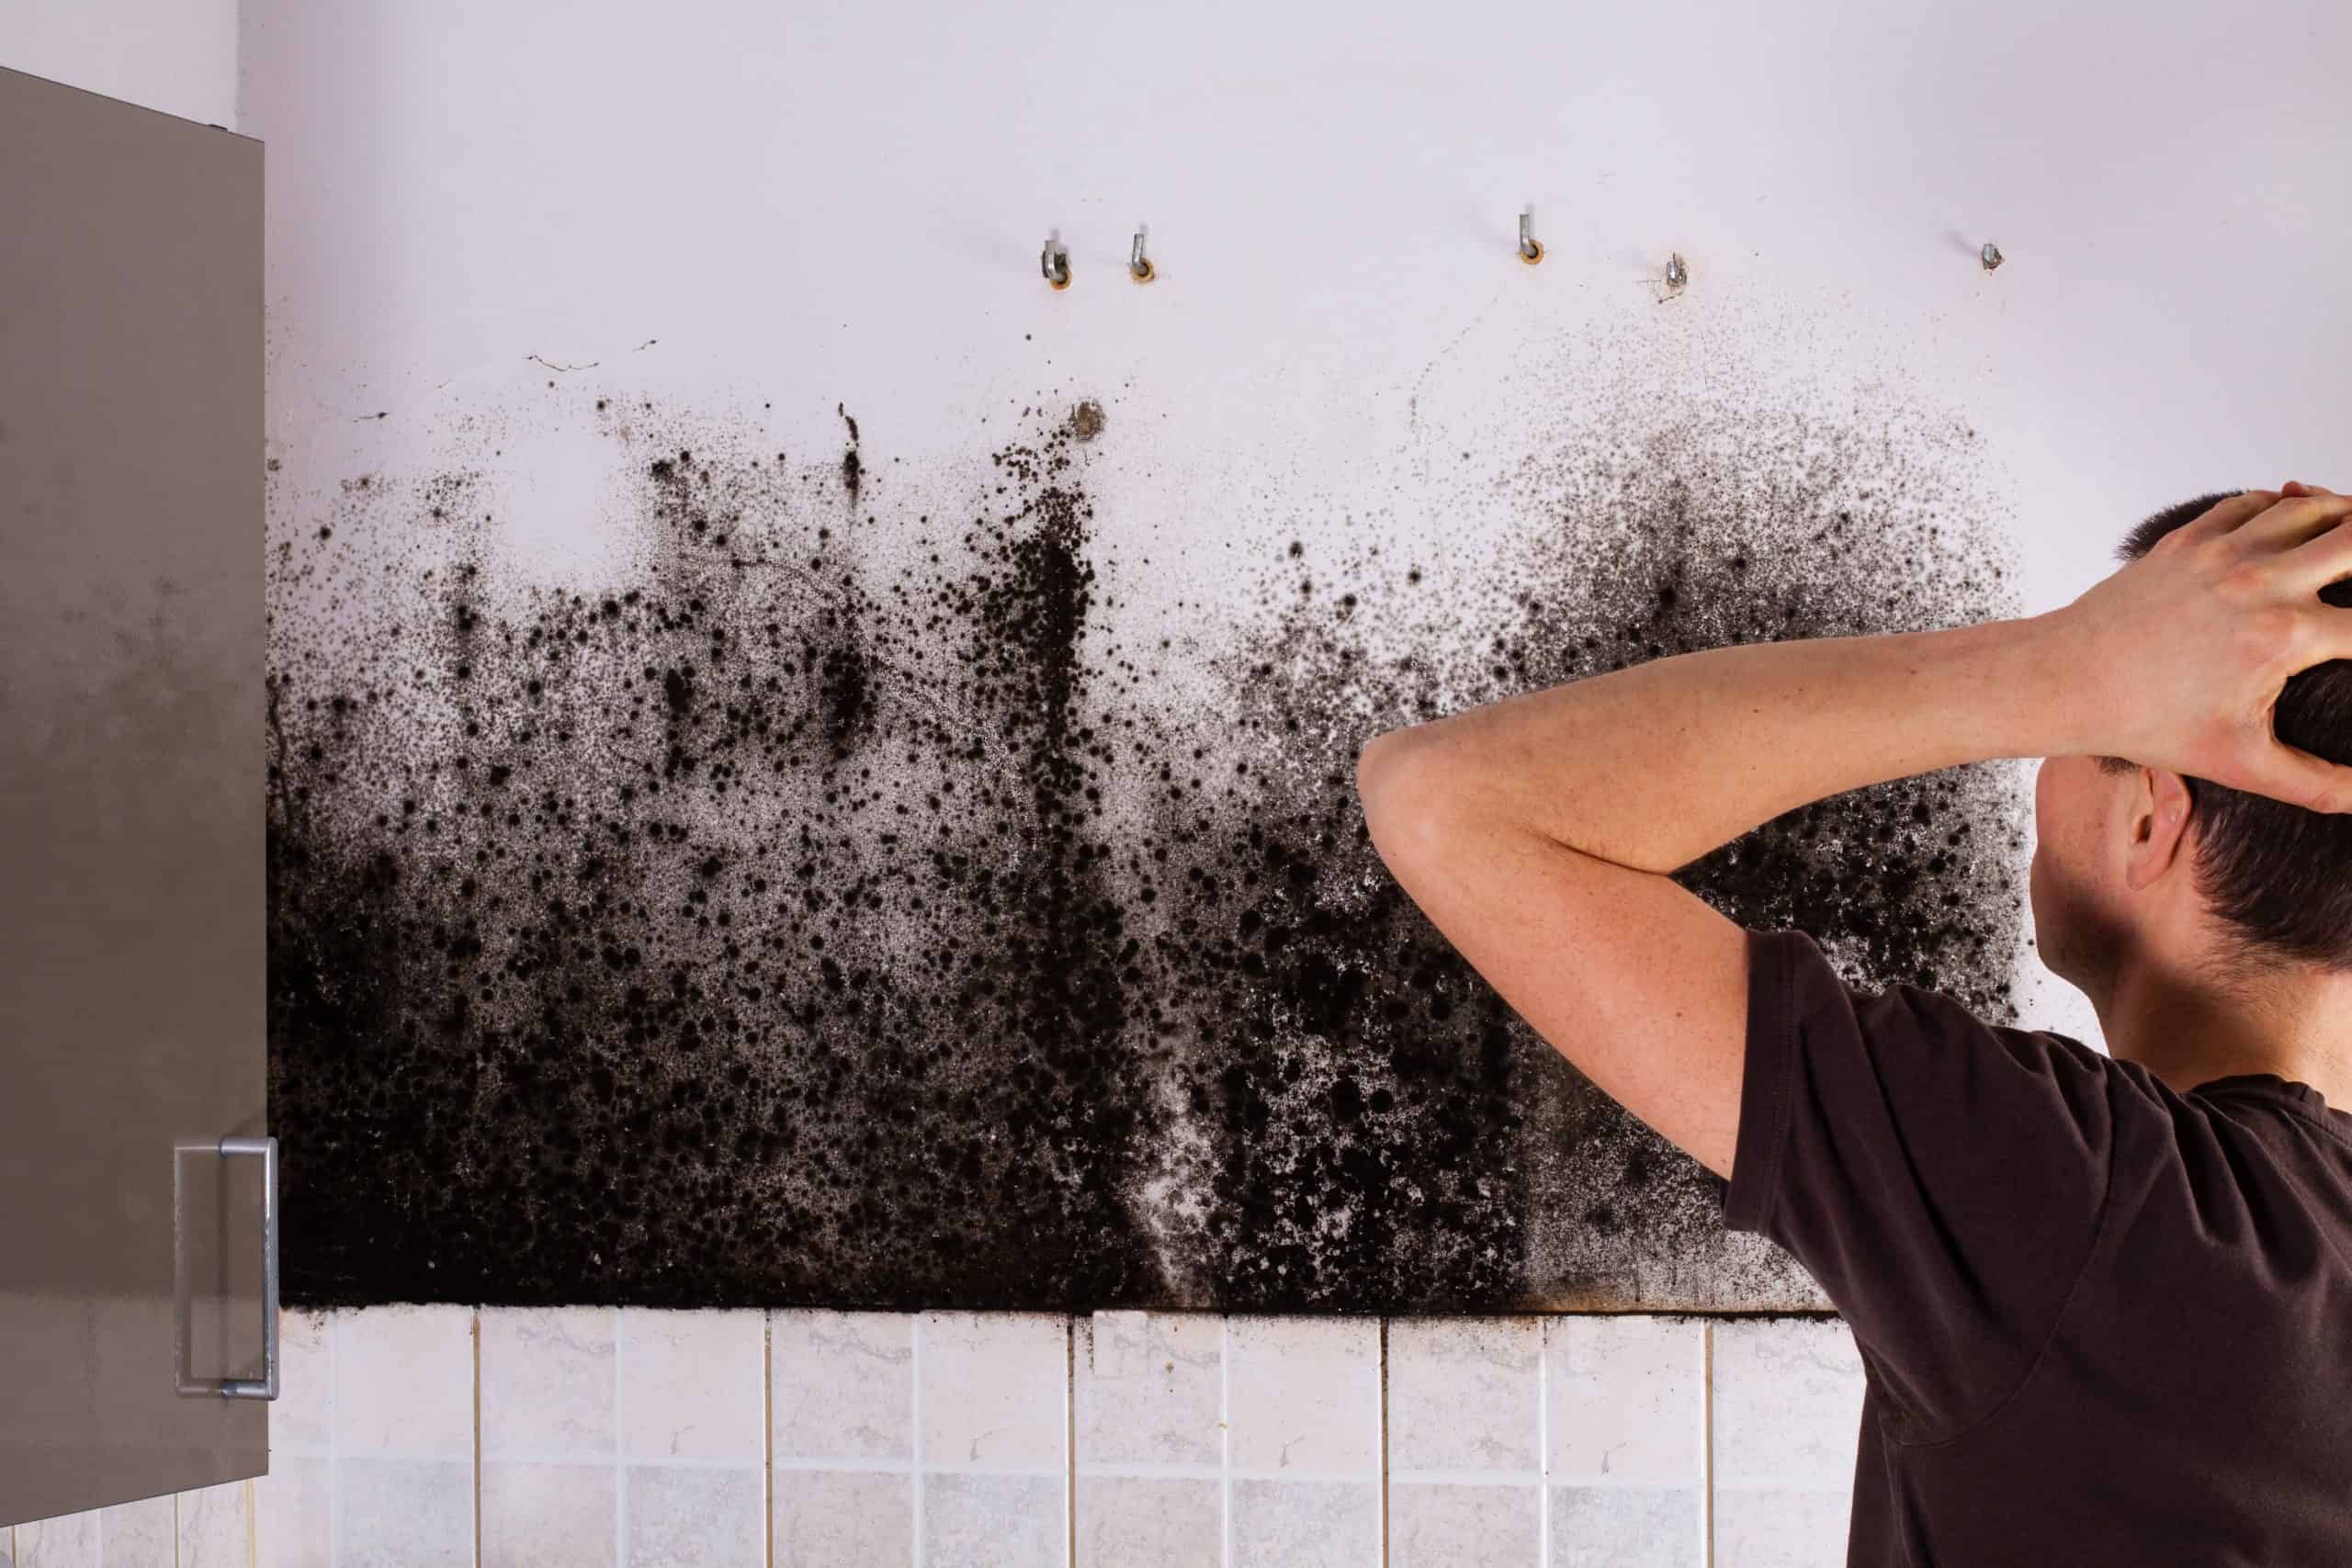 canton-water-damage-restoration-company explains mold and more